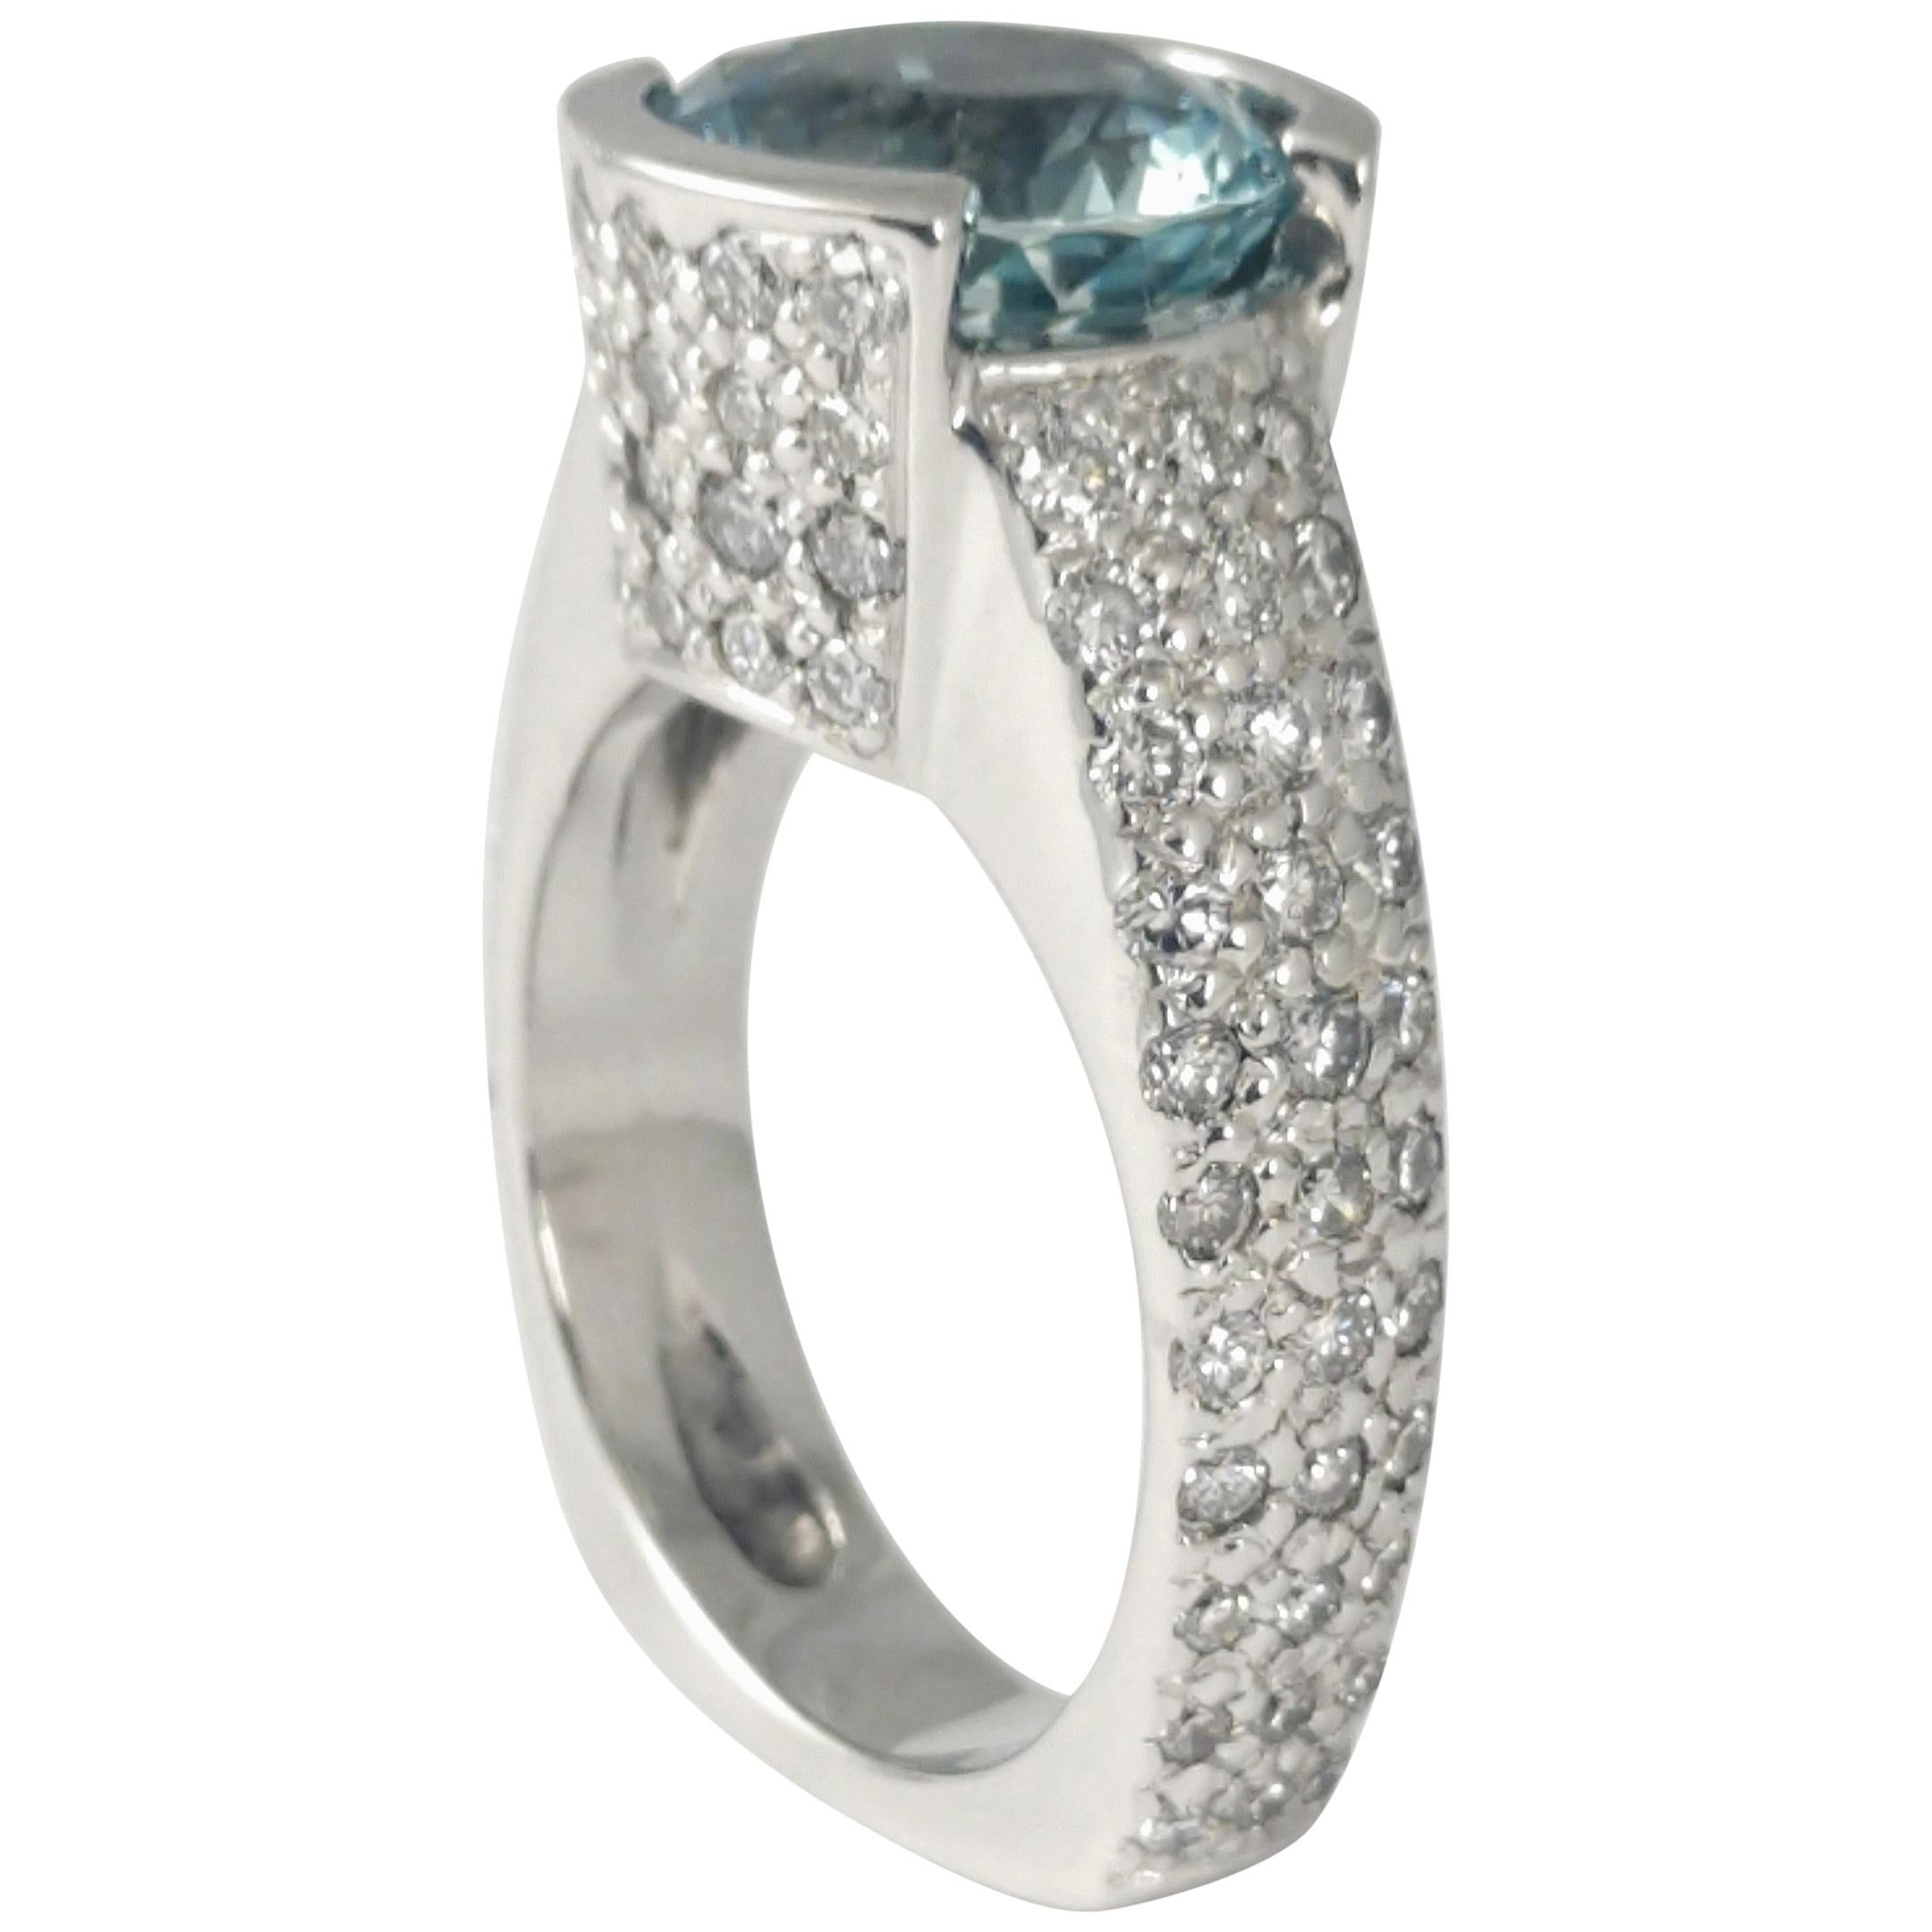 2.75 Carat Round Aquamarine and Pave Diamond Ring Classic Contemporary Fashion For Sale